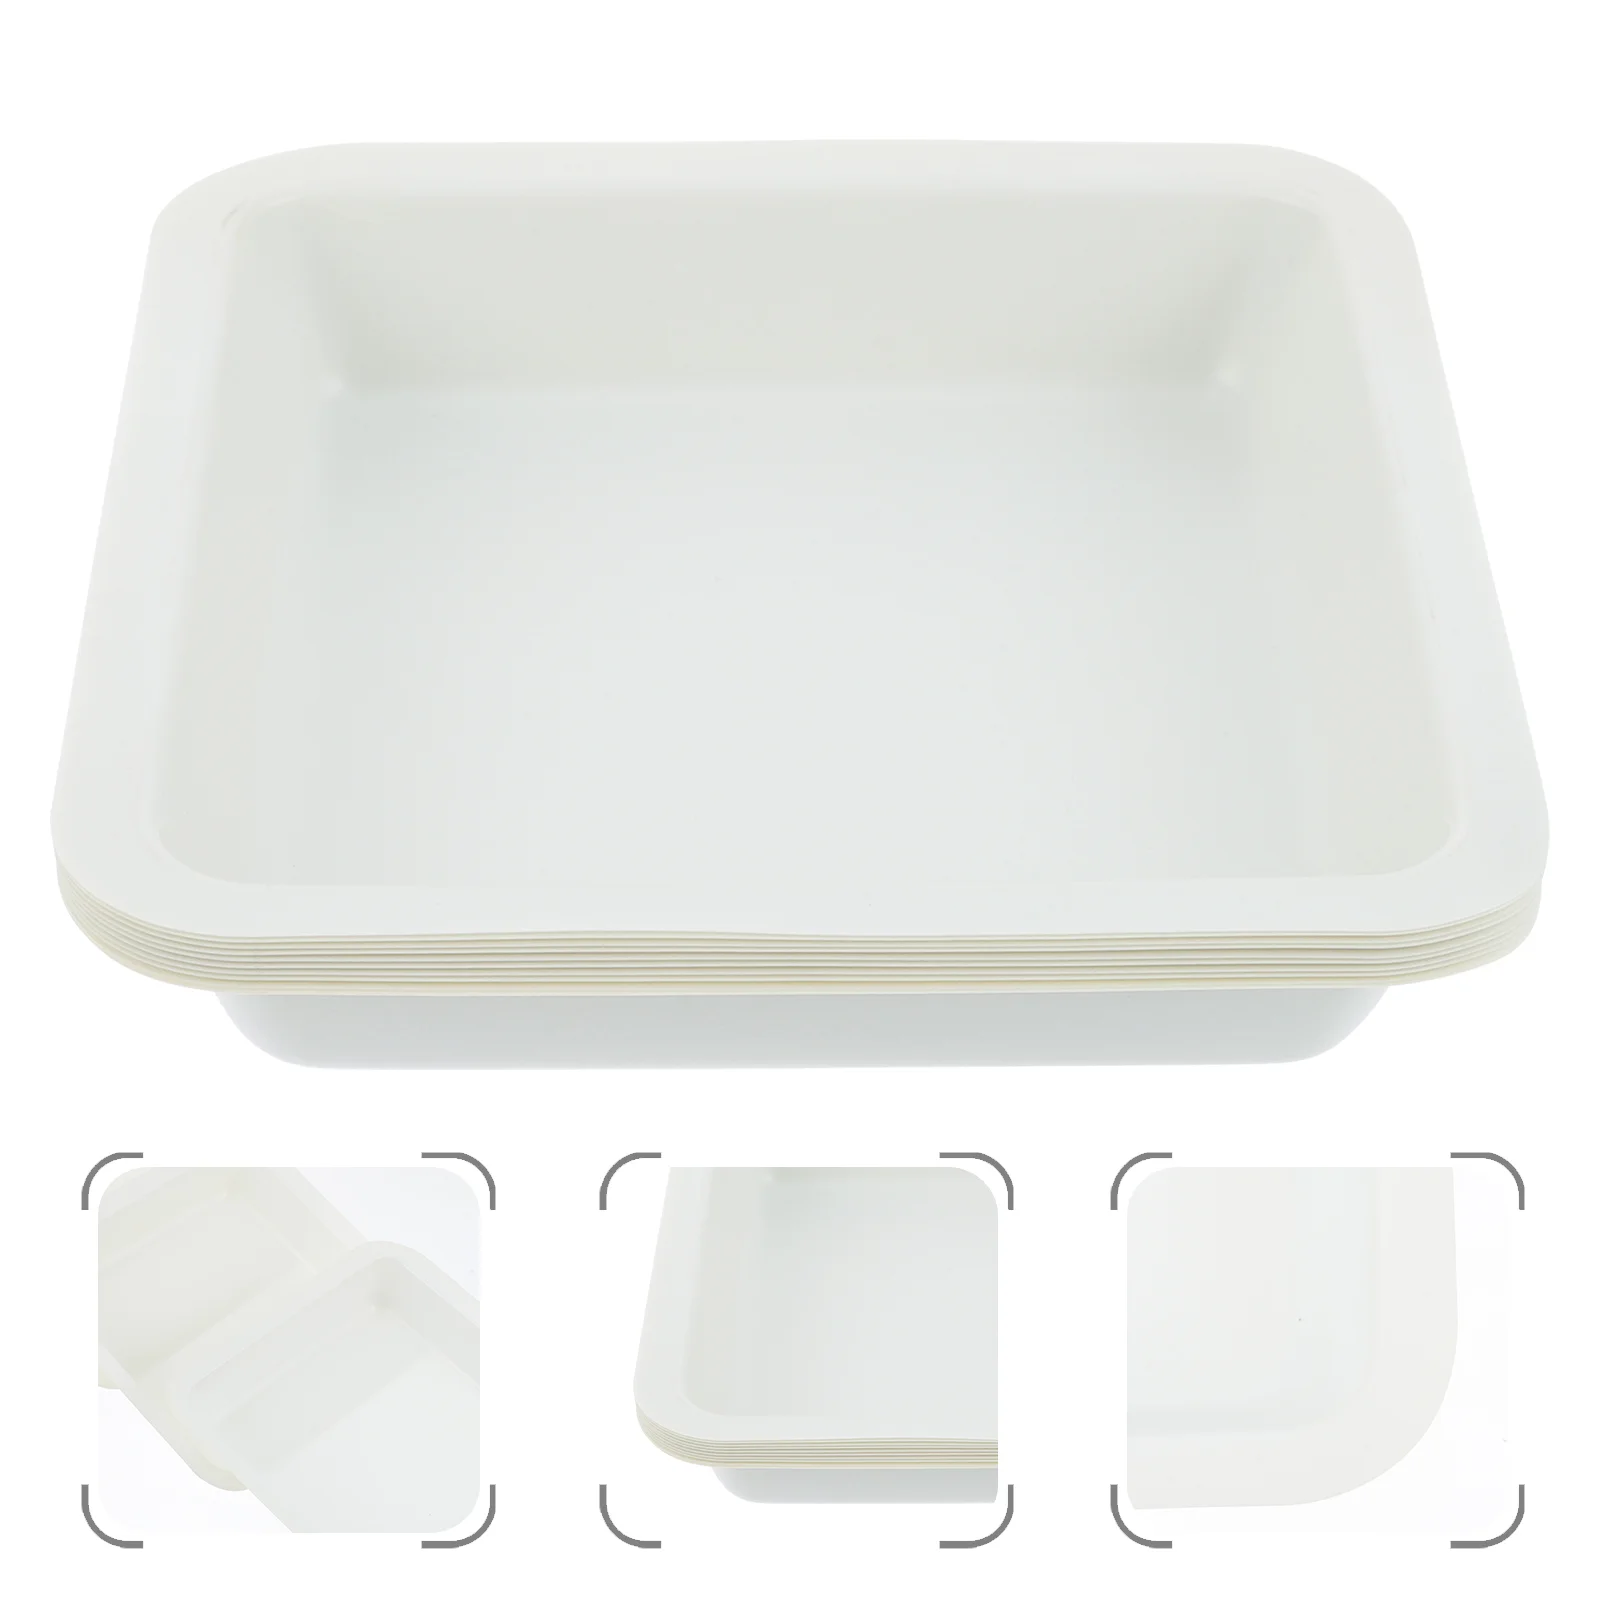 

10 Pcs Weighing Boat Plastic Boats Dishes Tray Labs Square Trays Anti-Static Plates